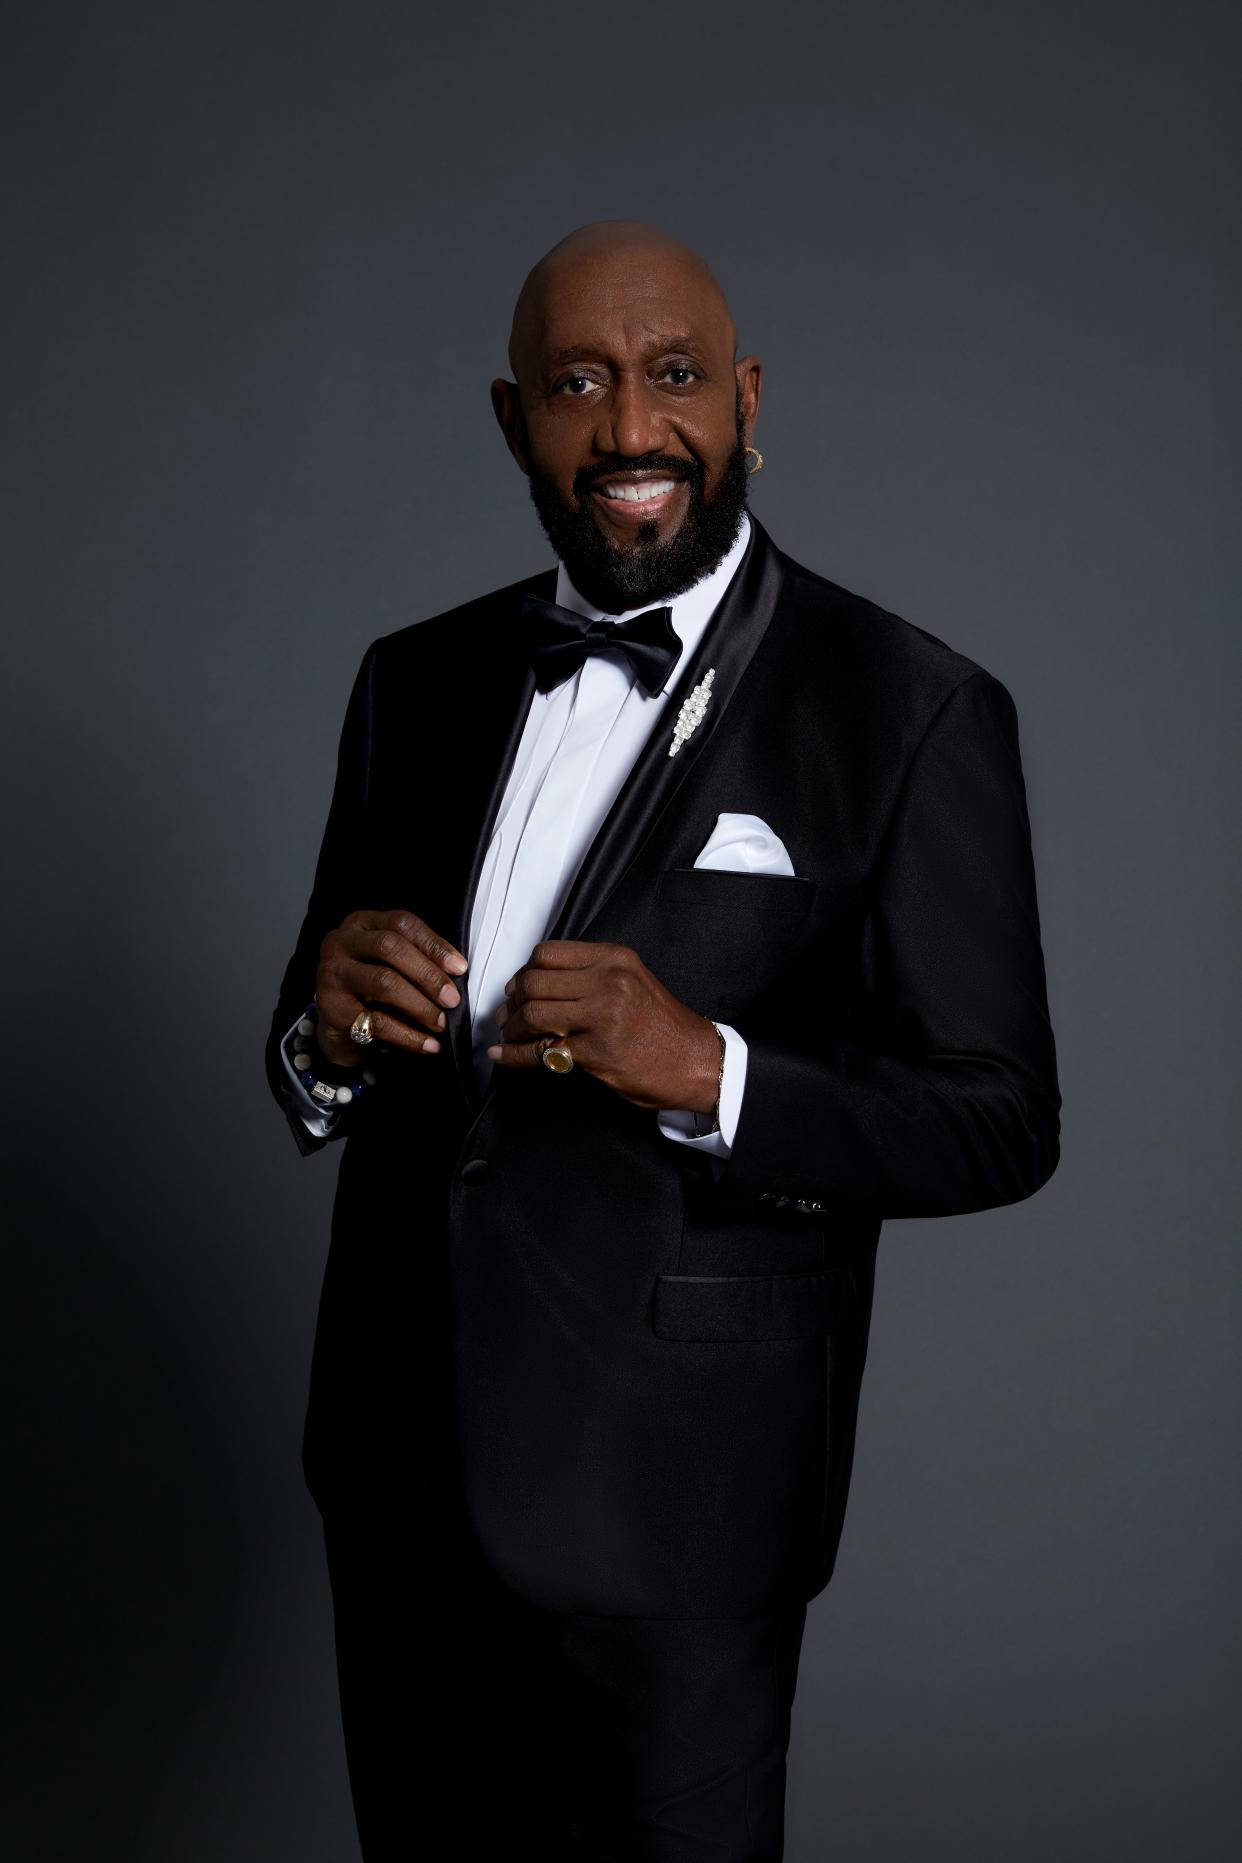 Otis Williams, one of the founding members of The Temptations. The group's rise from the early days of Motown to the Rock and Roll Hall of Fame is chronicled in "Ain't Too Proud: The Life and Times of The Temptations."